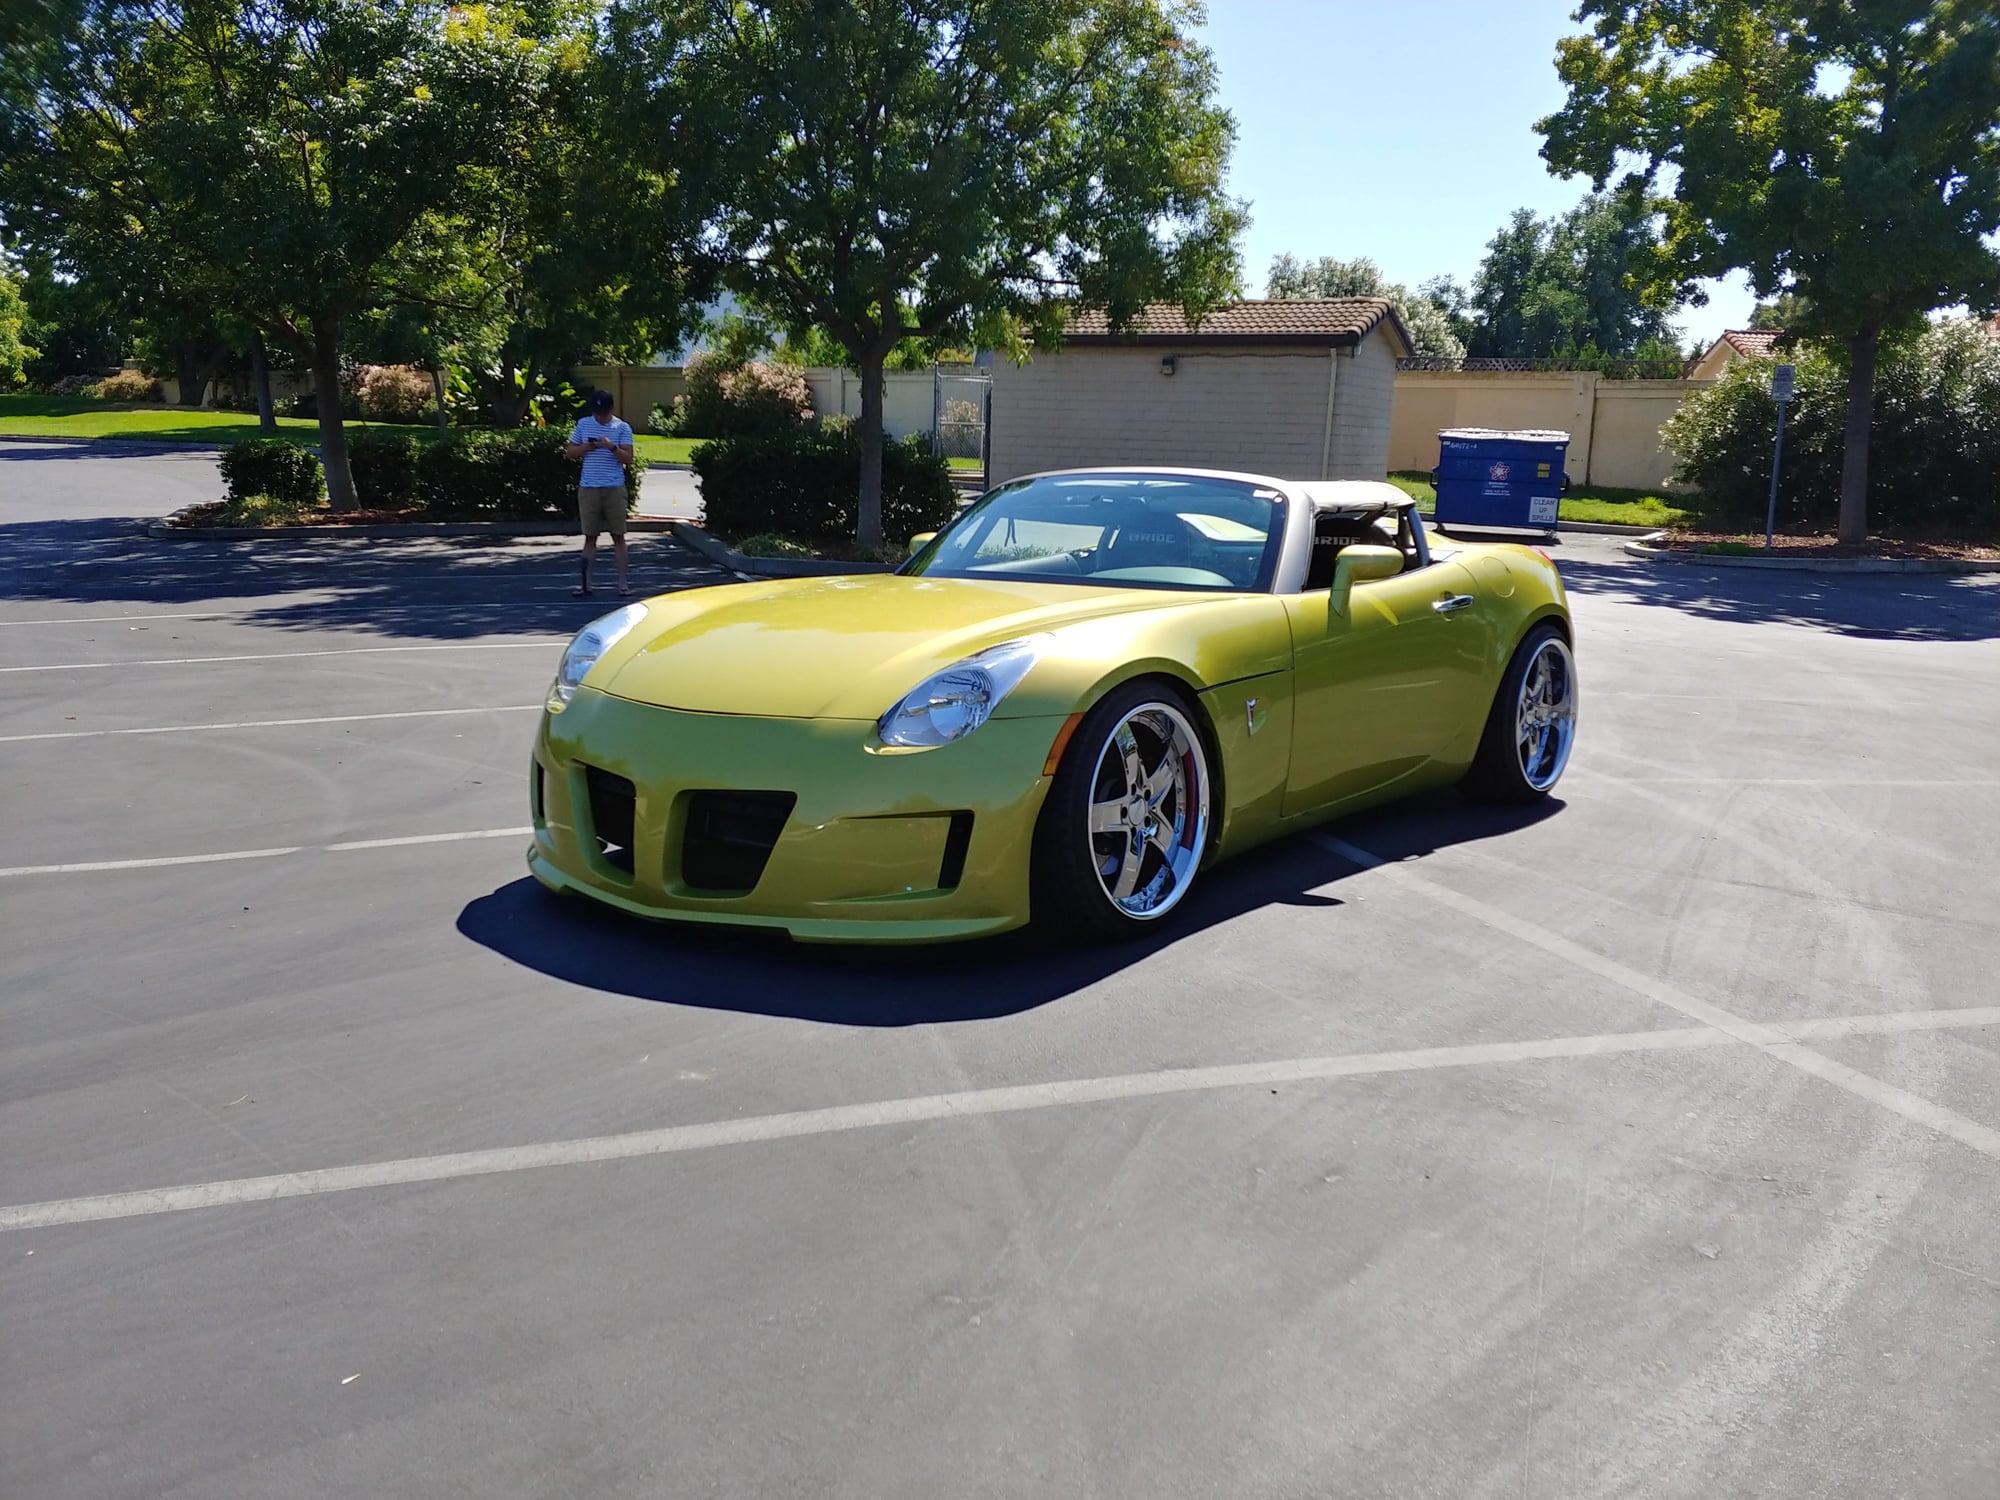 2006 Pontiac Solstice - For Sale - Northern California: 2006 Pontiac Solstice 2.4L 5 Speed Manual Race Car - Used - VIN 1G2MB35B06Y114554 - 880 Miles - 4 cyl - 2WD - Manual - Convertible - Other - San Jose, CA 92101, United States